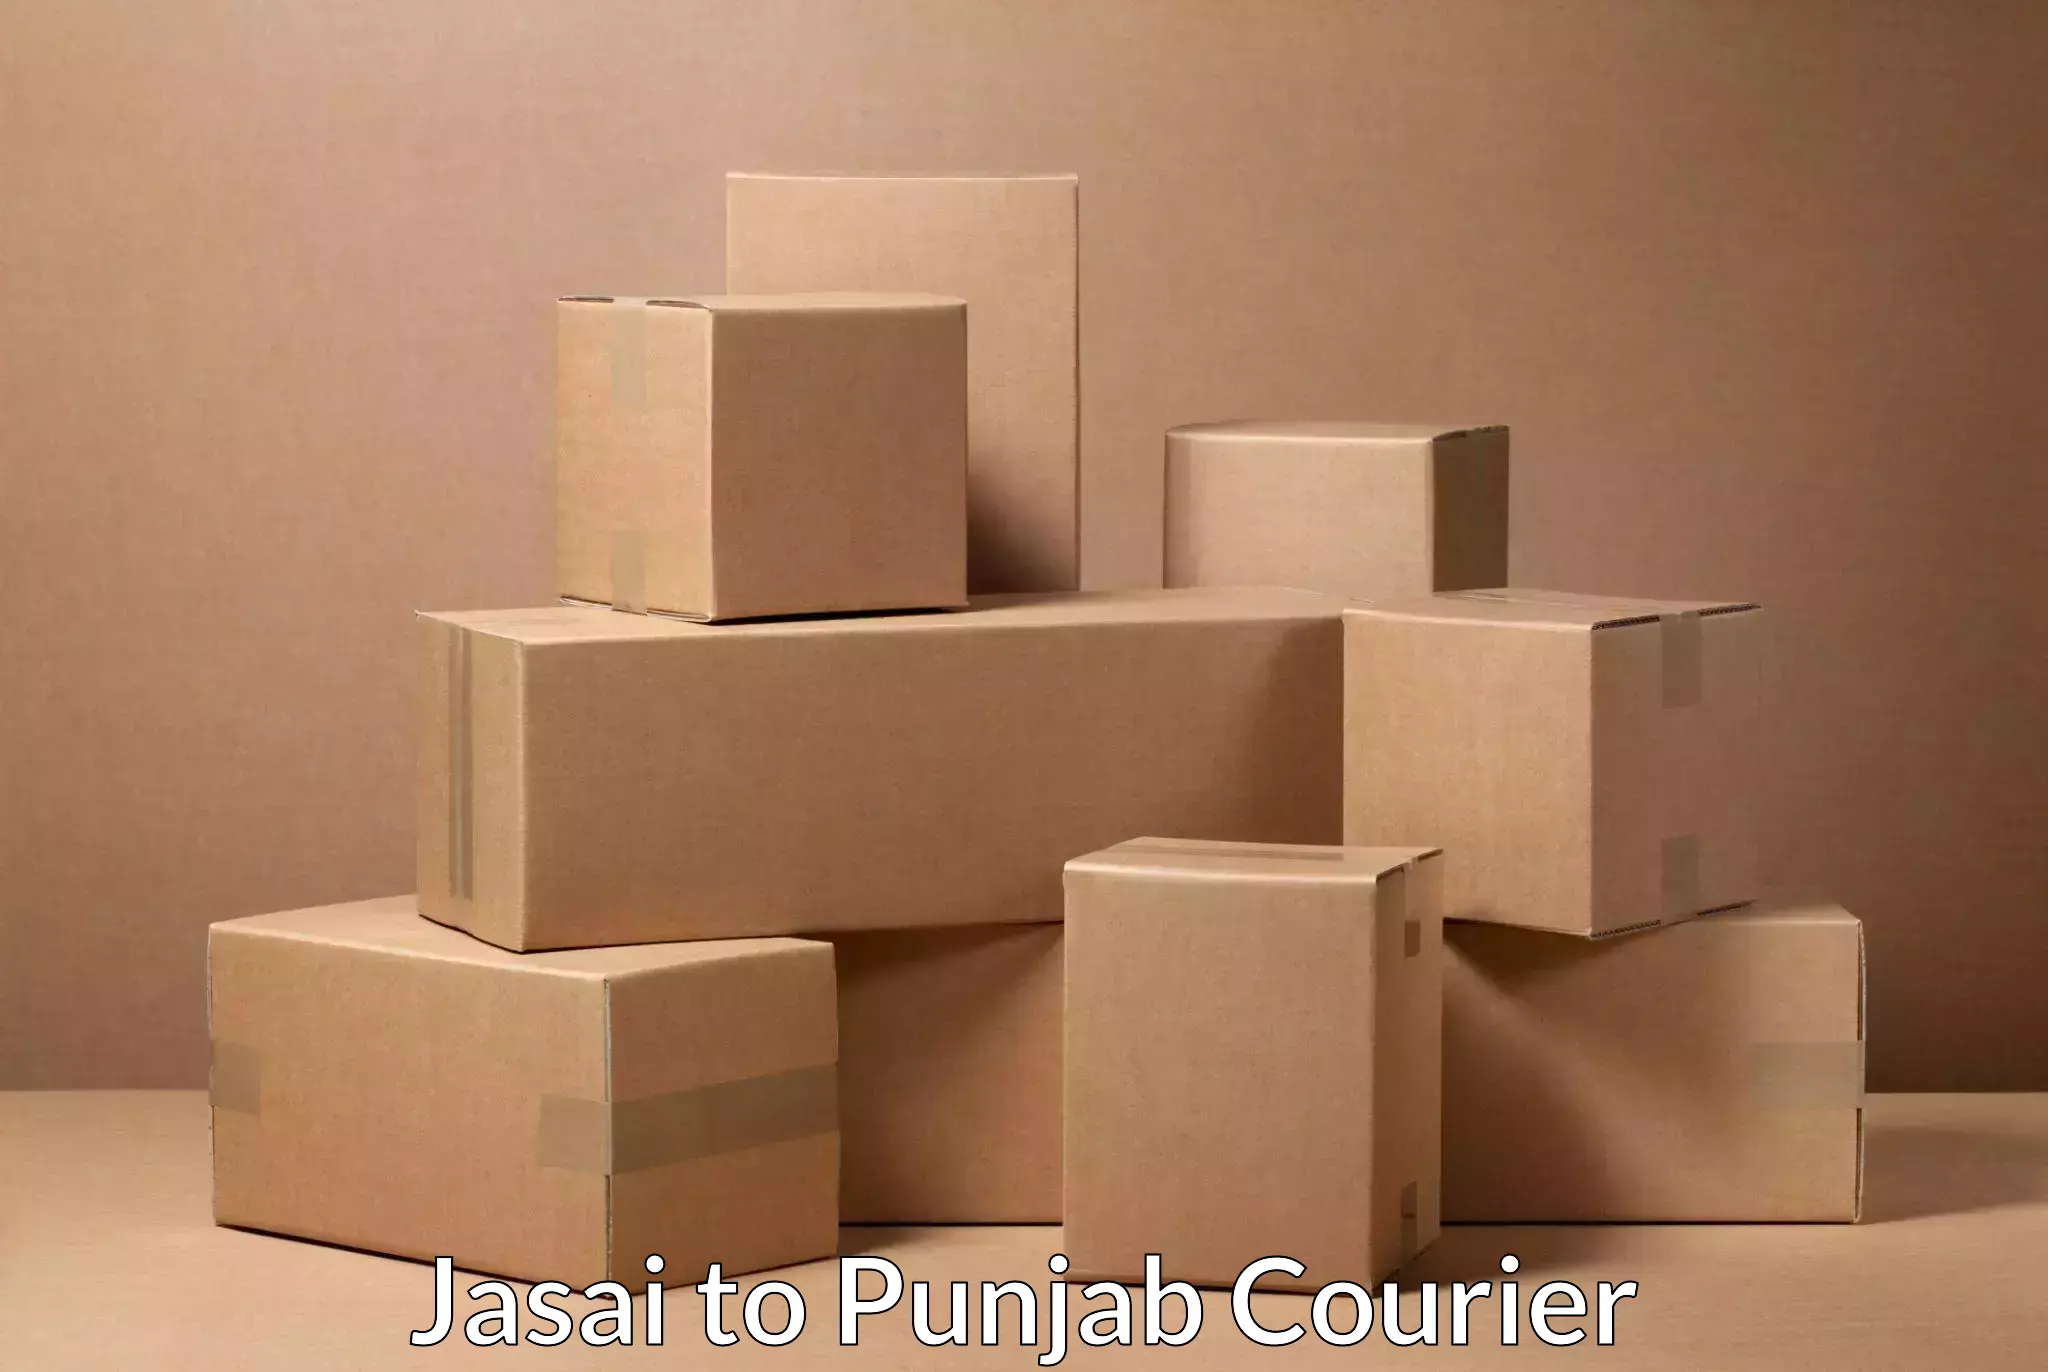 Personal courier services in Jasai to Zirakpur